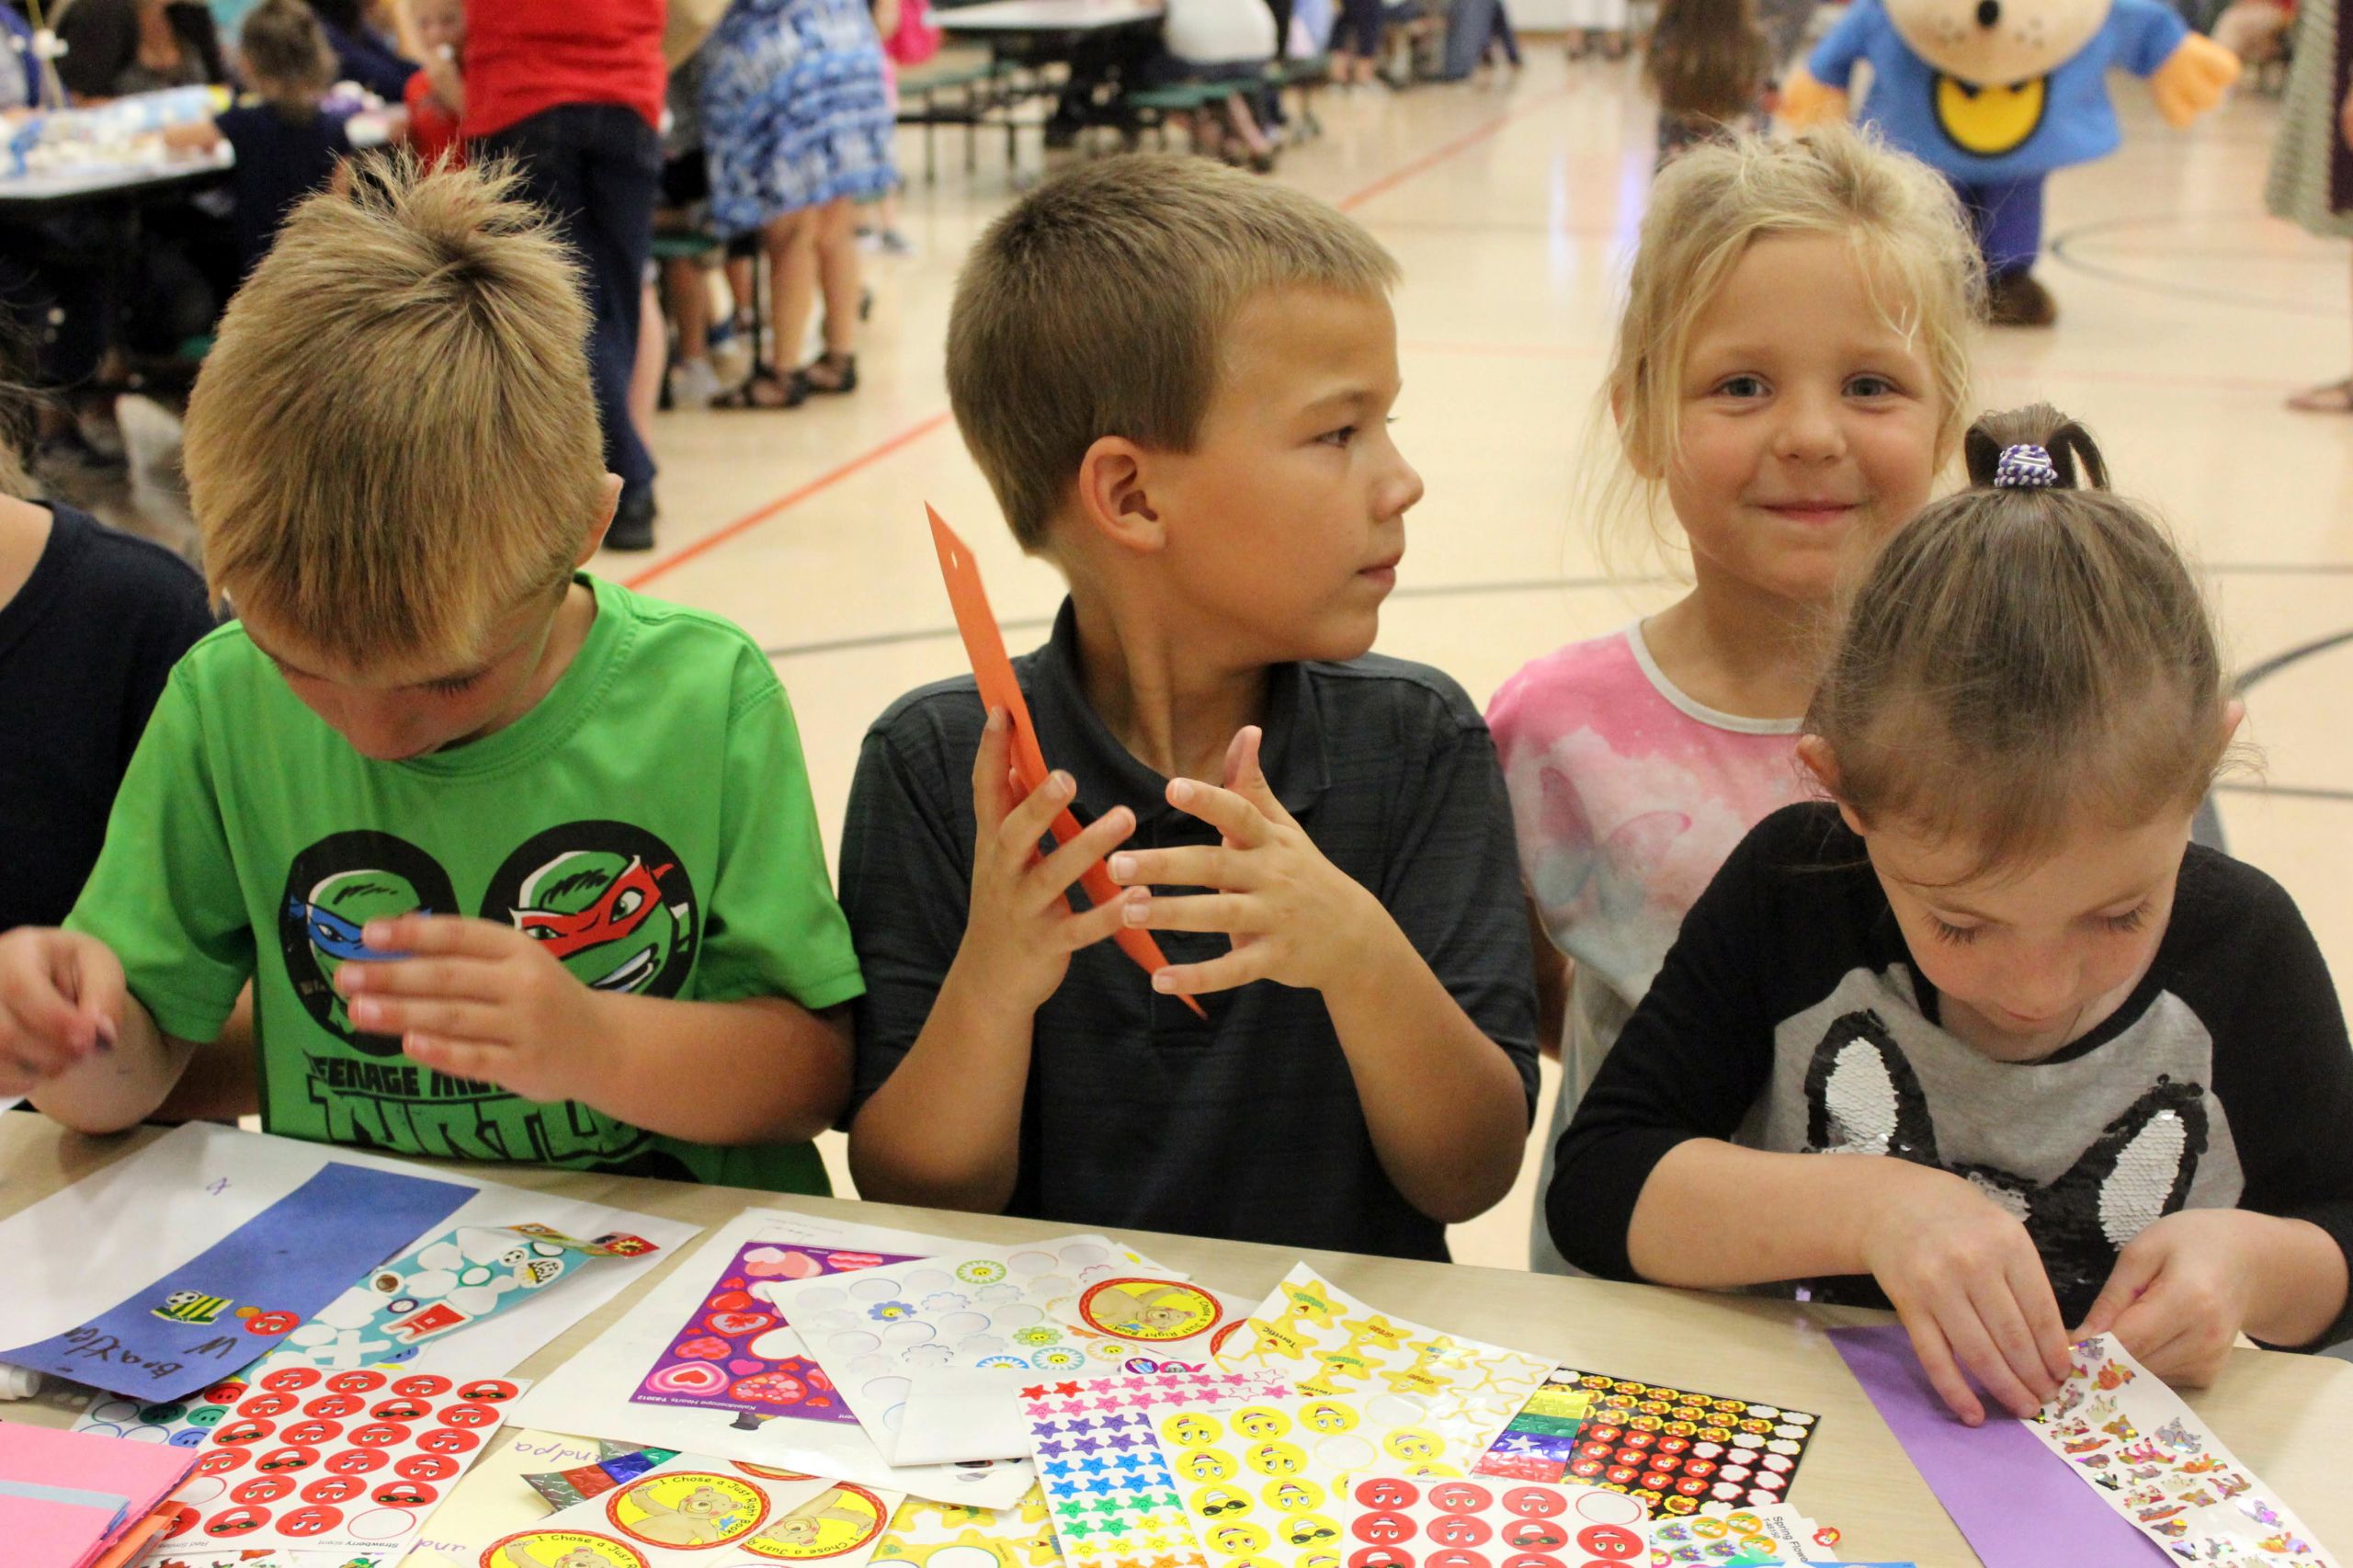 group of kids playing with stickers - Kingston K-14